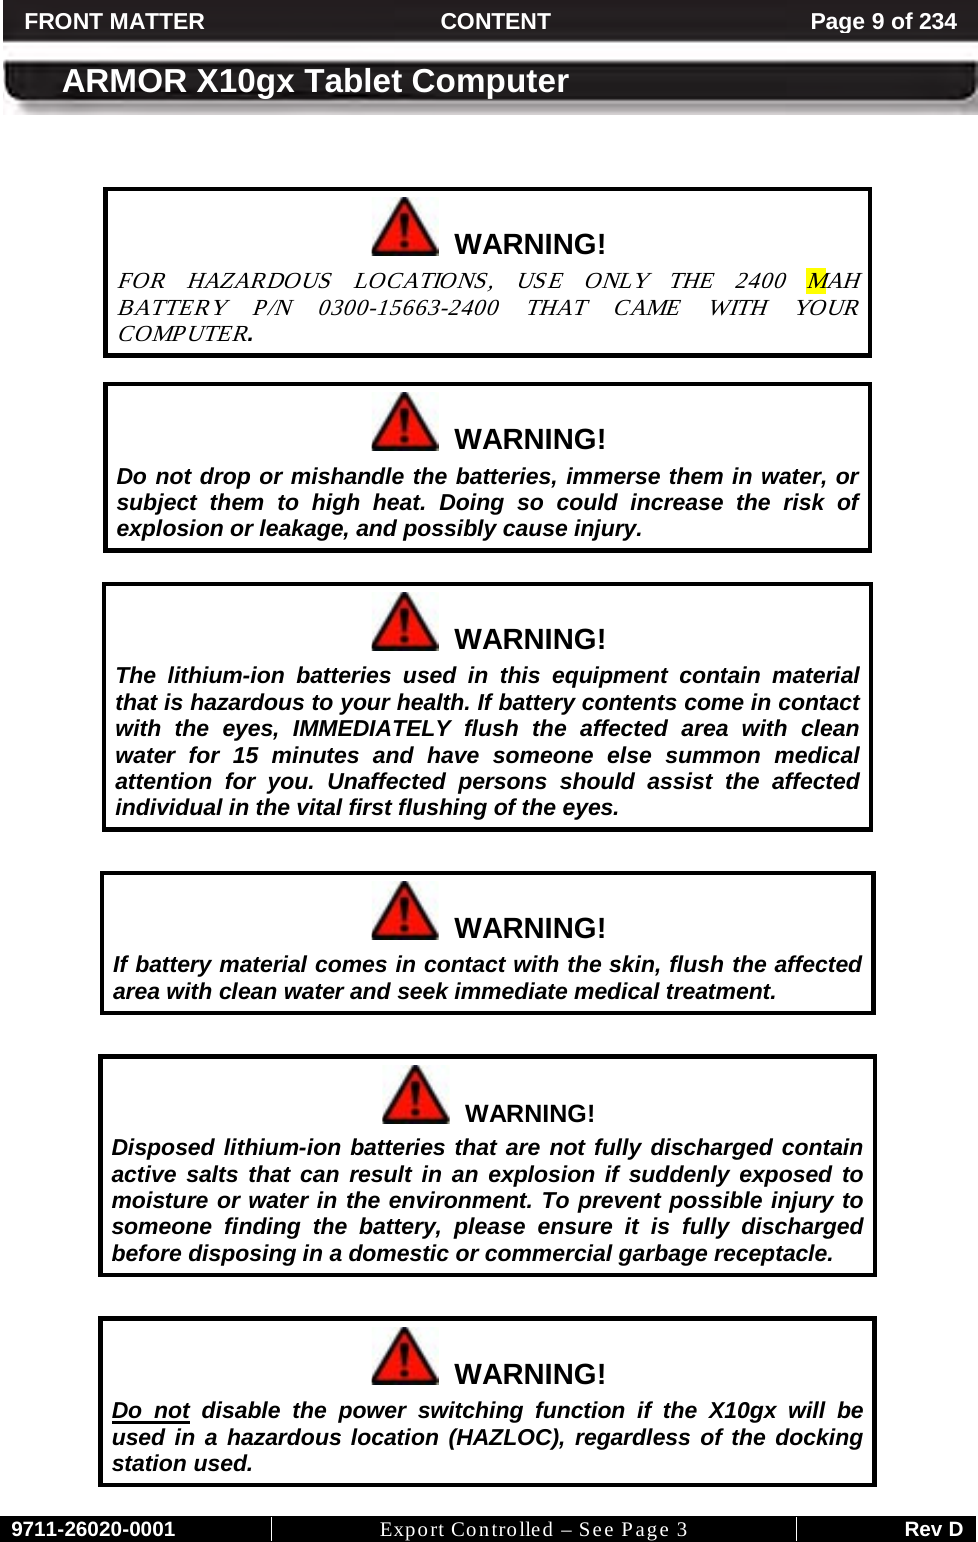     9711-26020-0001 Export Controlled – See Page 3 Rev D FRONT MATTER CONTENT Page 9 of 234  ARMOR X10gx Tablet Computer     WARNING! FOR HAZARDOUS LOCATIONS, USE ONLY THE 2400  MAH BATTERY P/N 0300-15663-2400 THAT CAME WITH YOUR COMP UTER.    WARNING! Do not drop or mishandle the batteries, immerse them in water, or subject them to high heat. Doing so could increase the risk of explosion or leakage, and possibly cause injury.    WARNING! The lithium-ion batteries used in this equipment contain material that is hazardous to your health. If battery contents come in contact with the eyes, IMMEDIATELY flush the affected area with clean water for 15 minutes and have someone else summon medical attention for you. Unaffected persons should assist the affected individual in the vital first flushing of the eyes.    WARNING! If battery material comes in contact with the skin, flush the affected area with clean water and seek immediate medical treatment.    WARNING! Disposed lithium-ion batteries that are not fully discharged contain active salts that can result in an explosion if suddenly exposed to moisture or water in the environment. To prevent possible injury to someone finding the battery, please ensure it is fully discharged before disposing in a domestic or commercial garbage receptacle.    WARNING! Do not disable the power switching function if the X10gx will be used in a hazardous location (HAZLOC), regardless of the docking station used. 